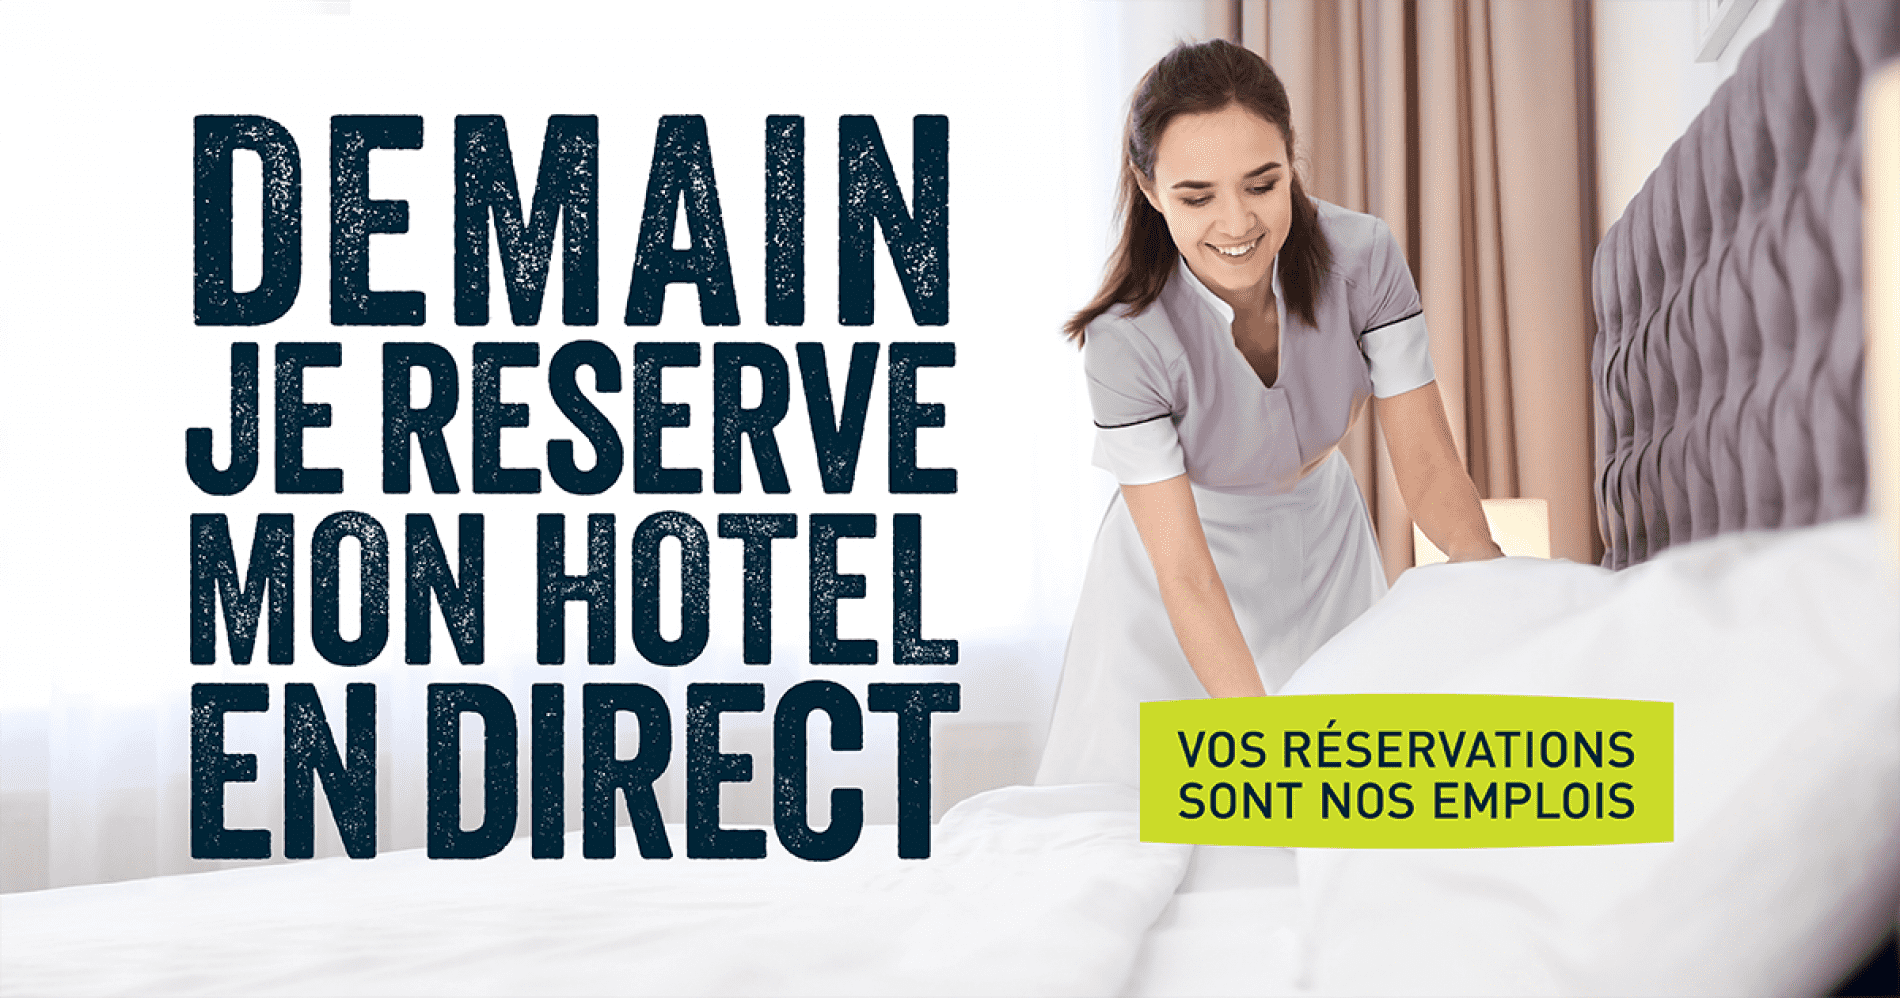 Why make a direct hotel booking ?